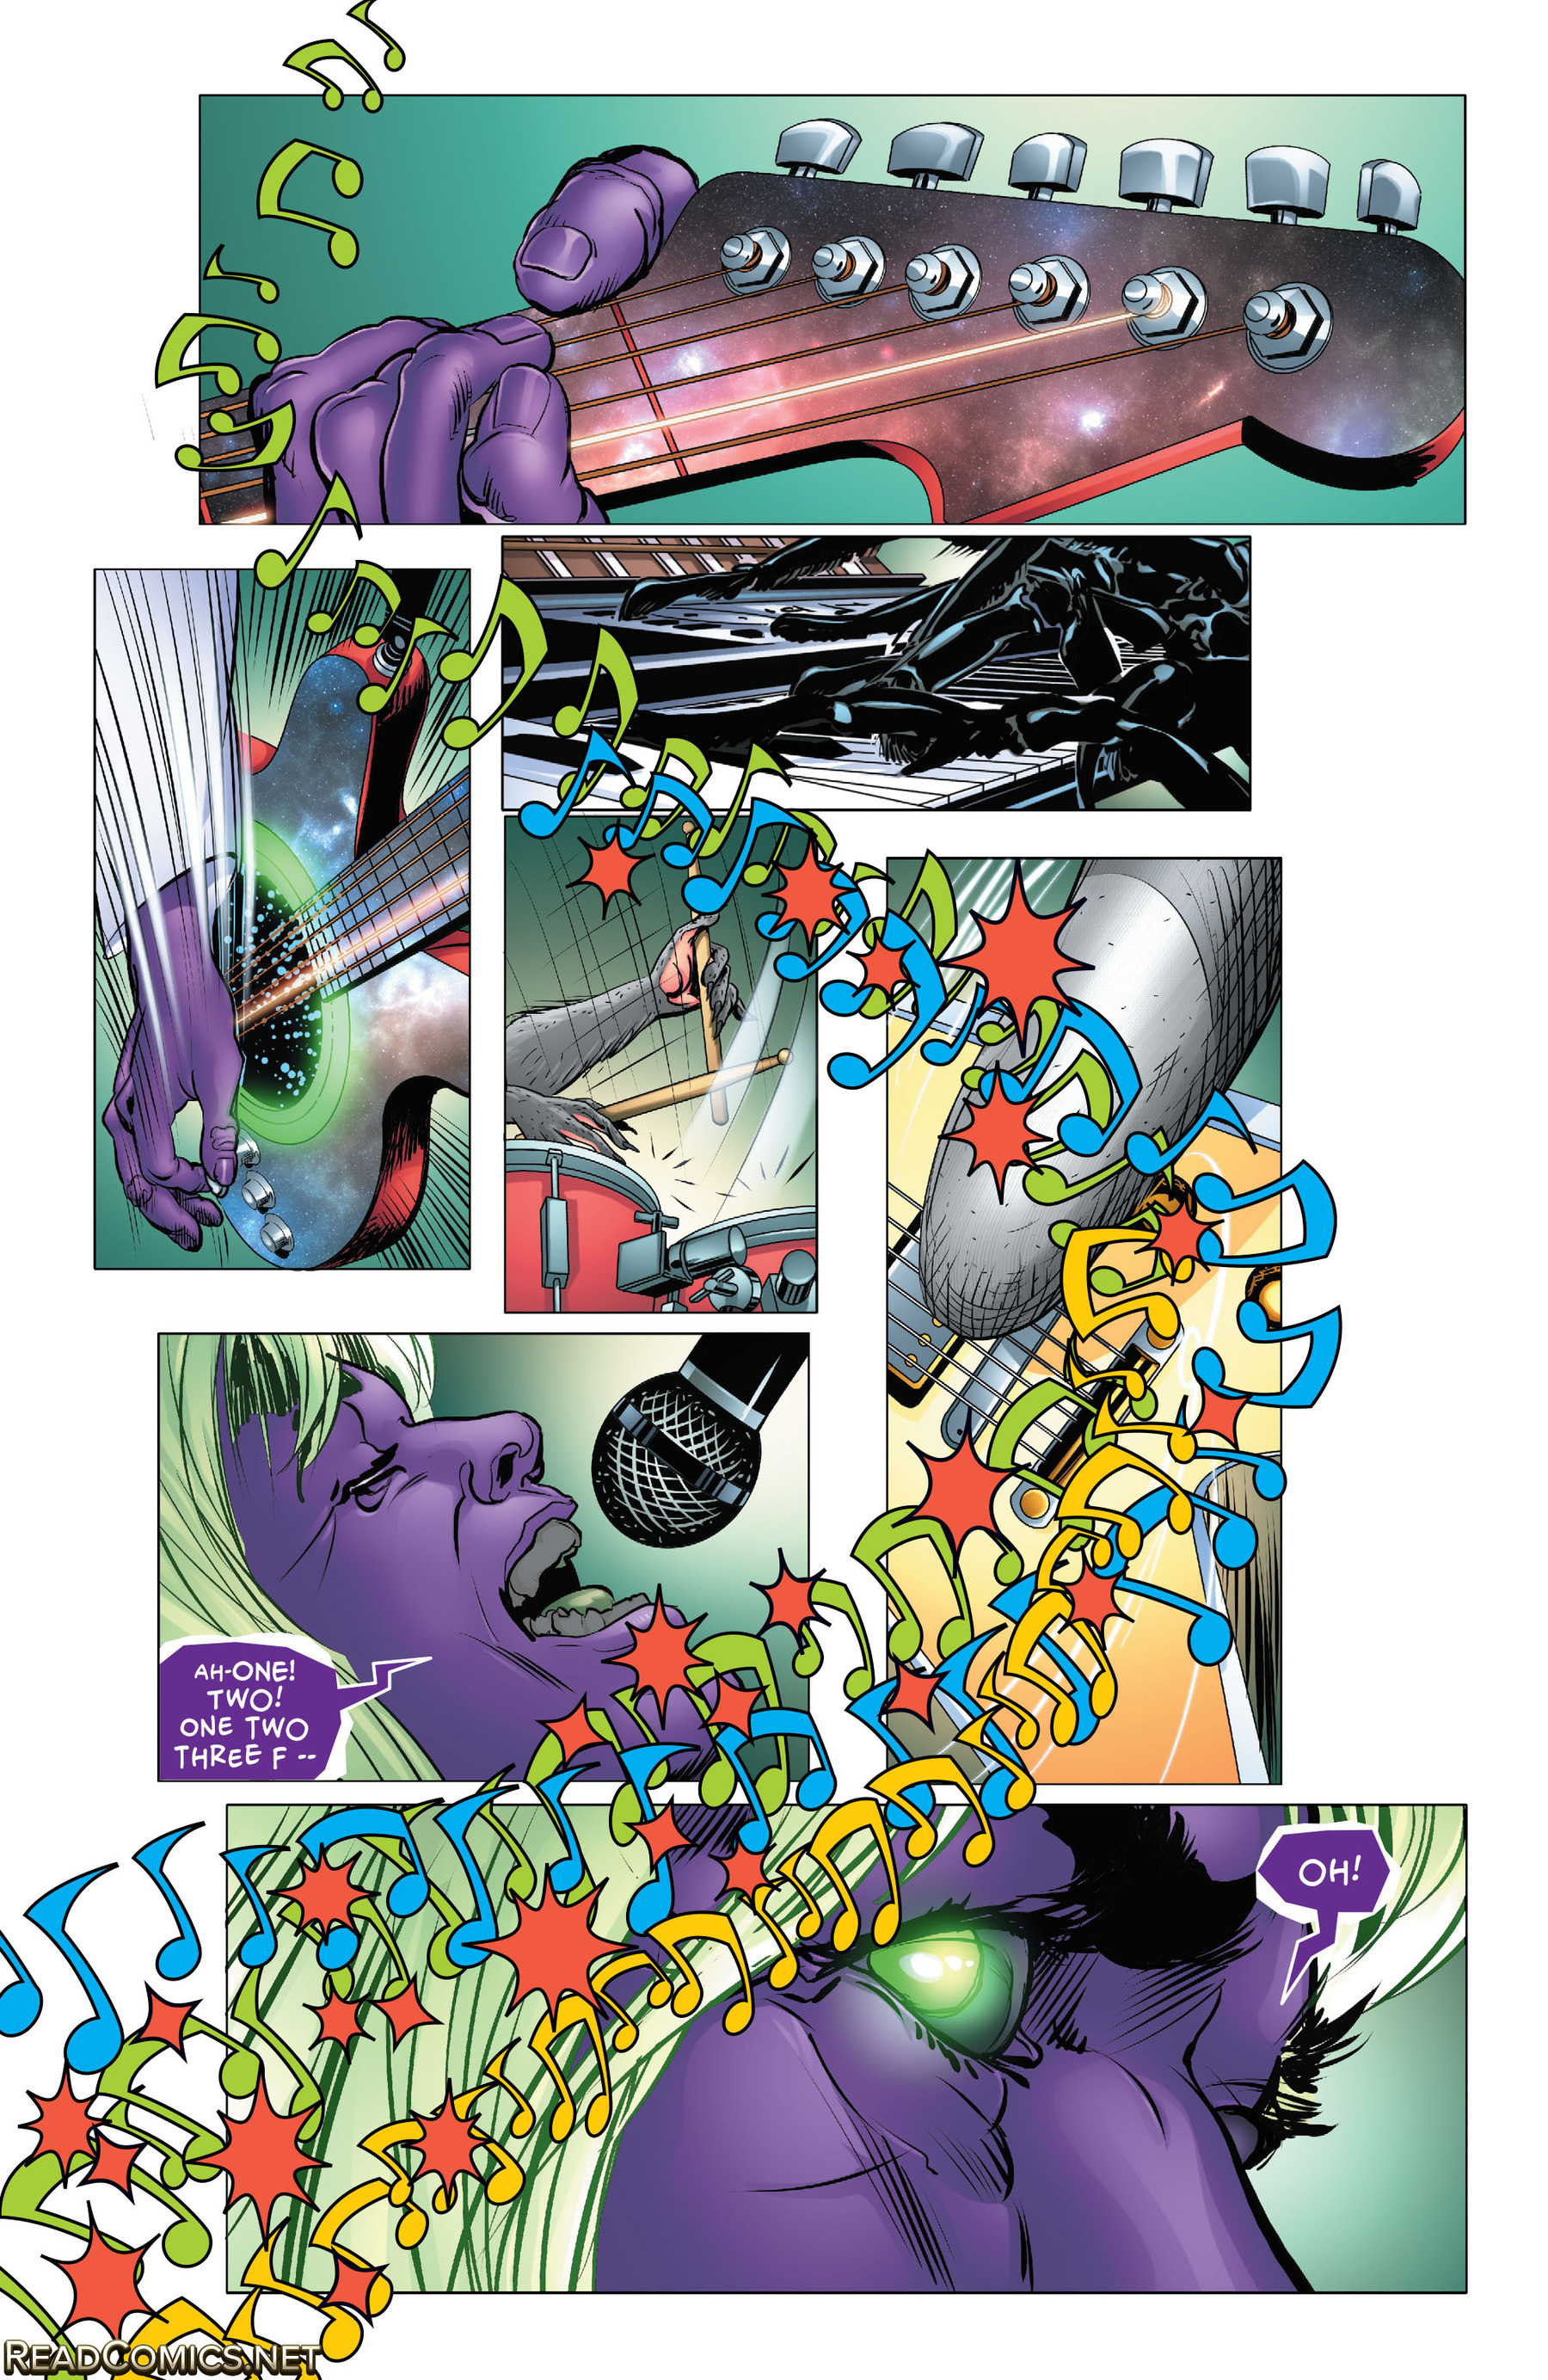 Astro City (2013-): Chapter 37 - Page 2